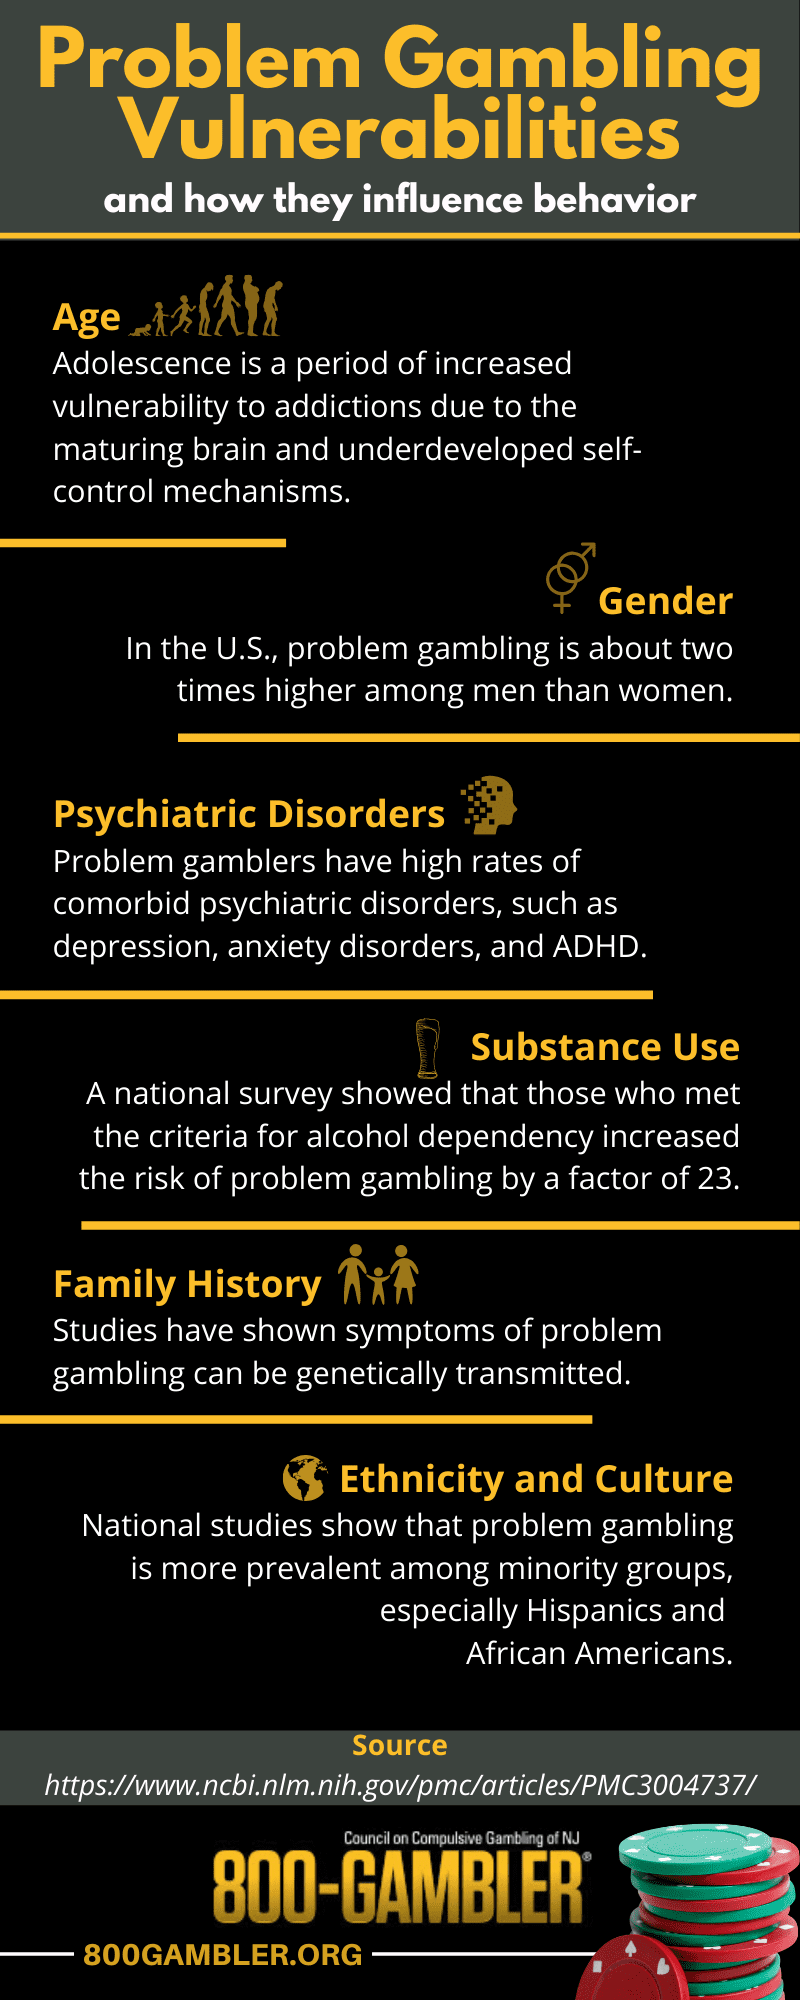 Who is most prone to gambling?